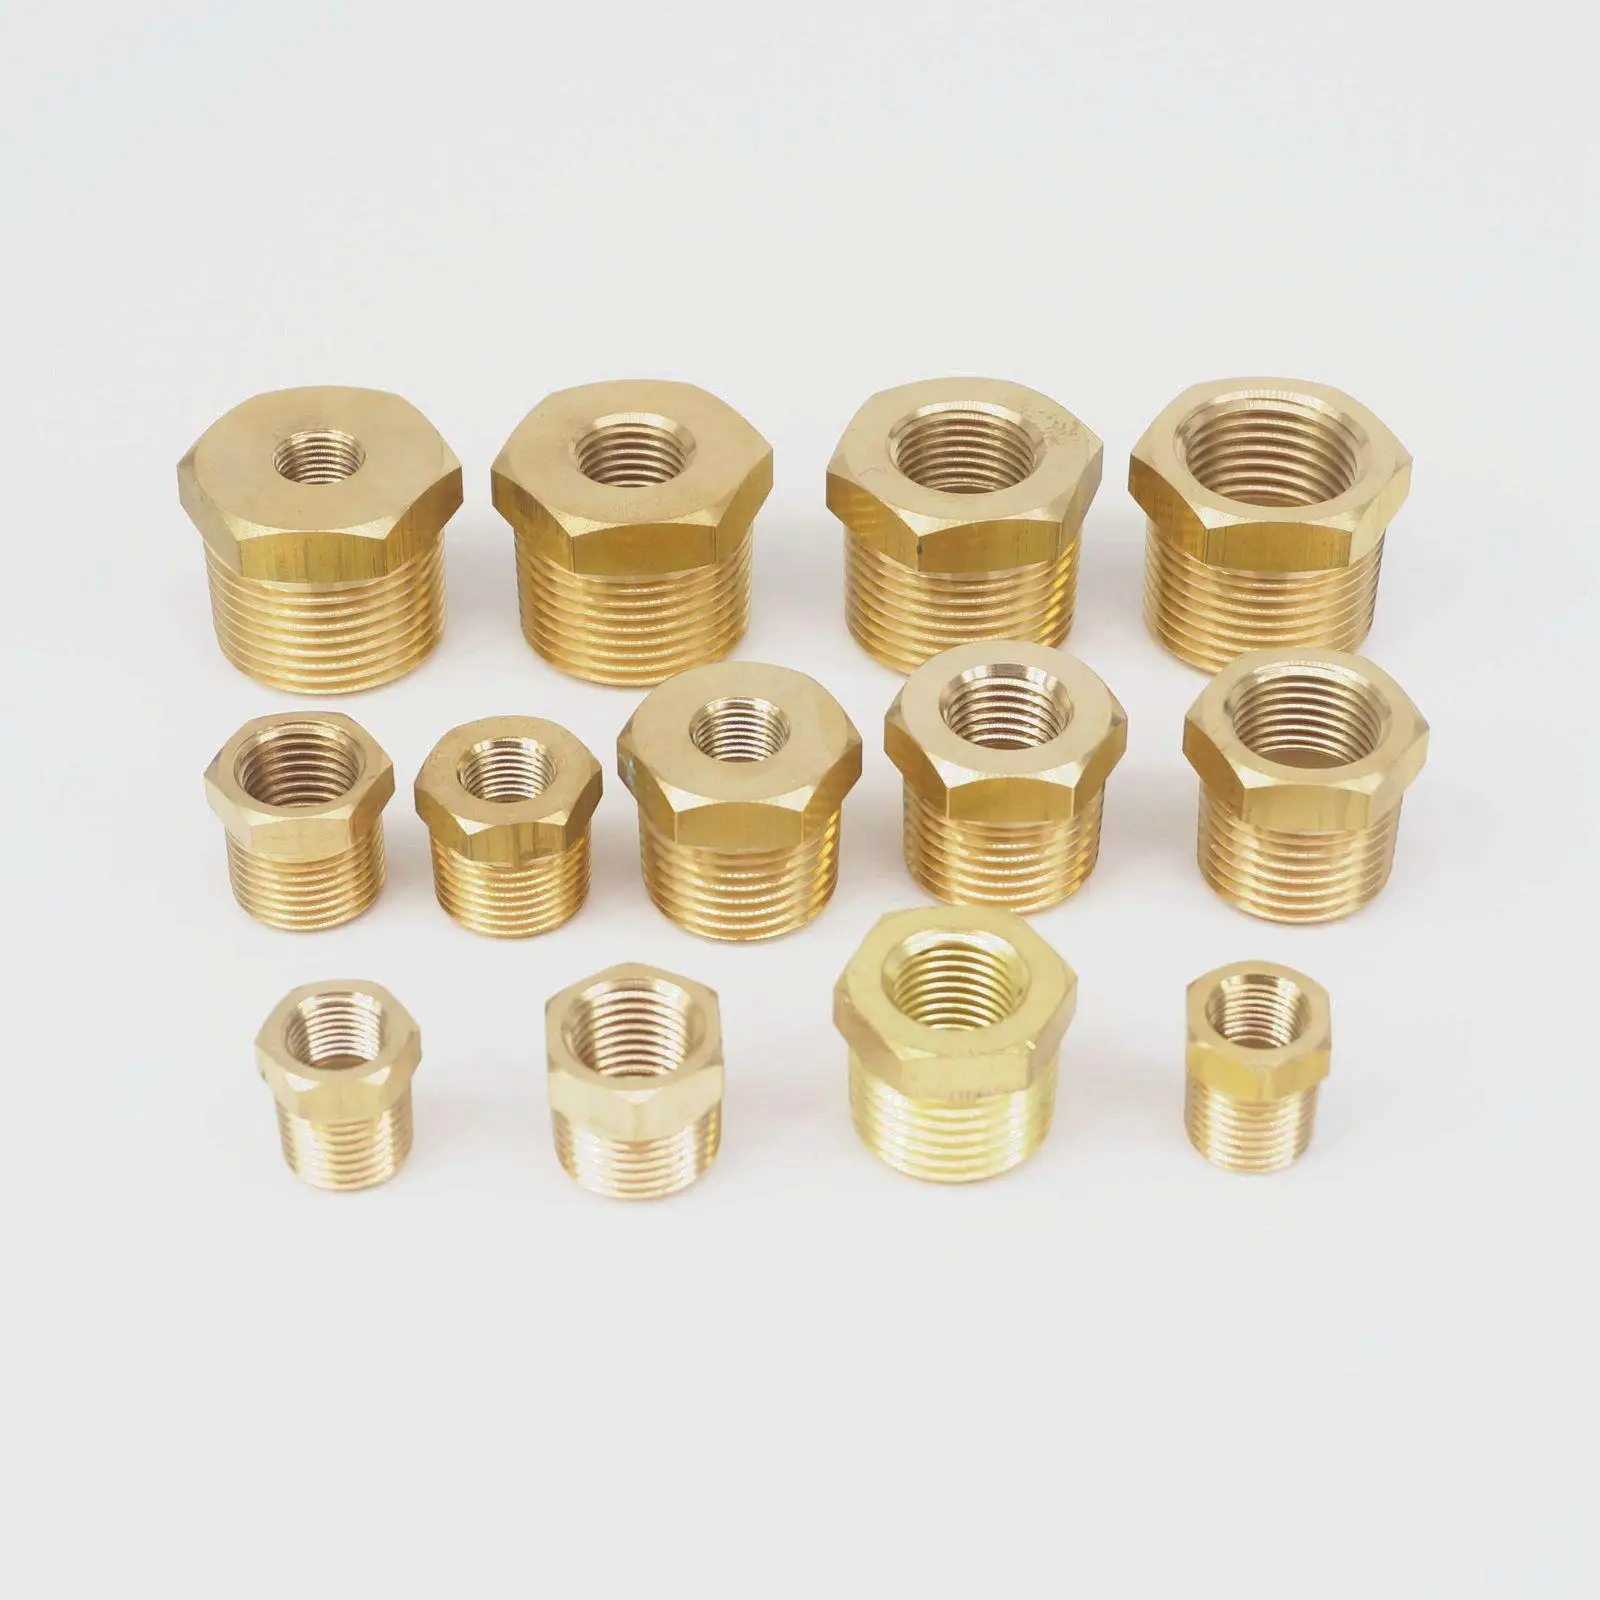 BRASS HEX BUSHING REDUCING NPT THREADS PIPE FITTING 3/8 MALE X 1/4 FEMALE QTY 5 